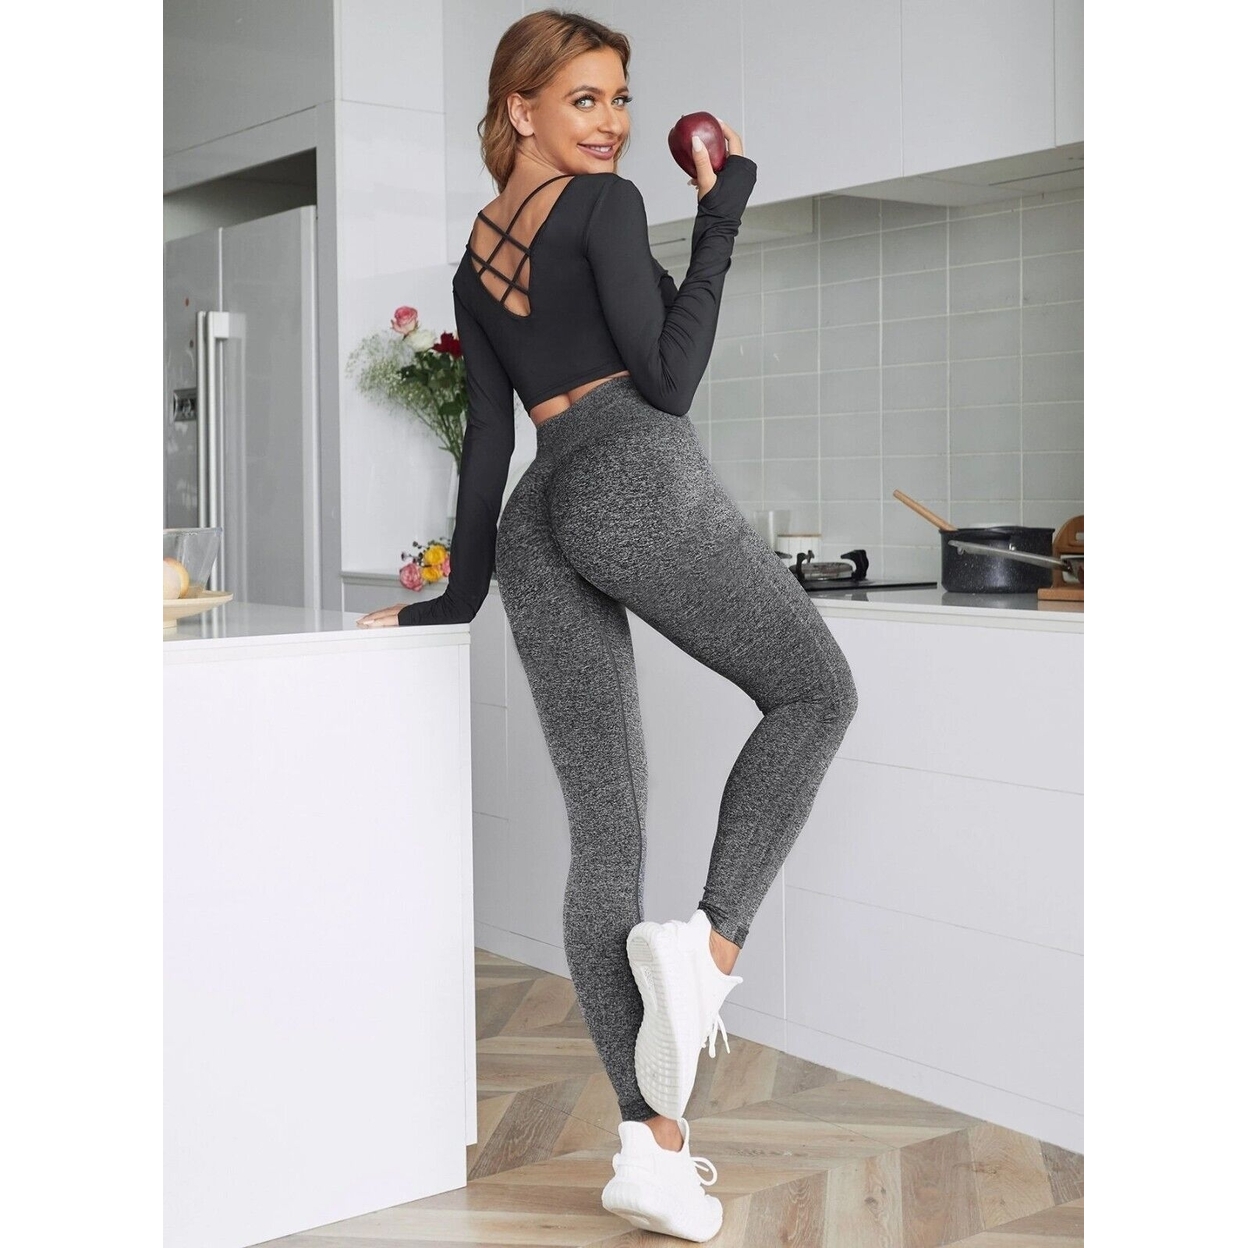 Women's Winter Warm Marled High Waist Fleece Lined Thick Thermal Leggings Pants - Charcoal, 2x